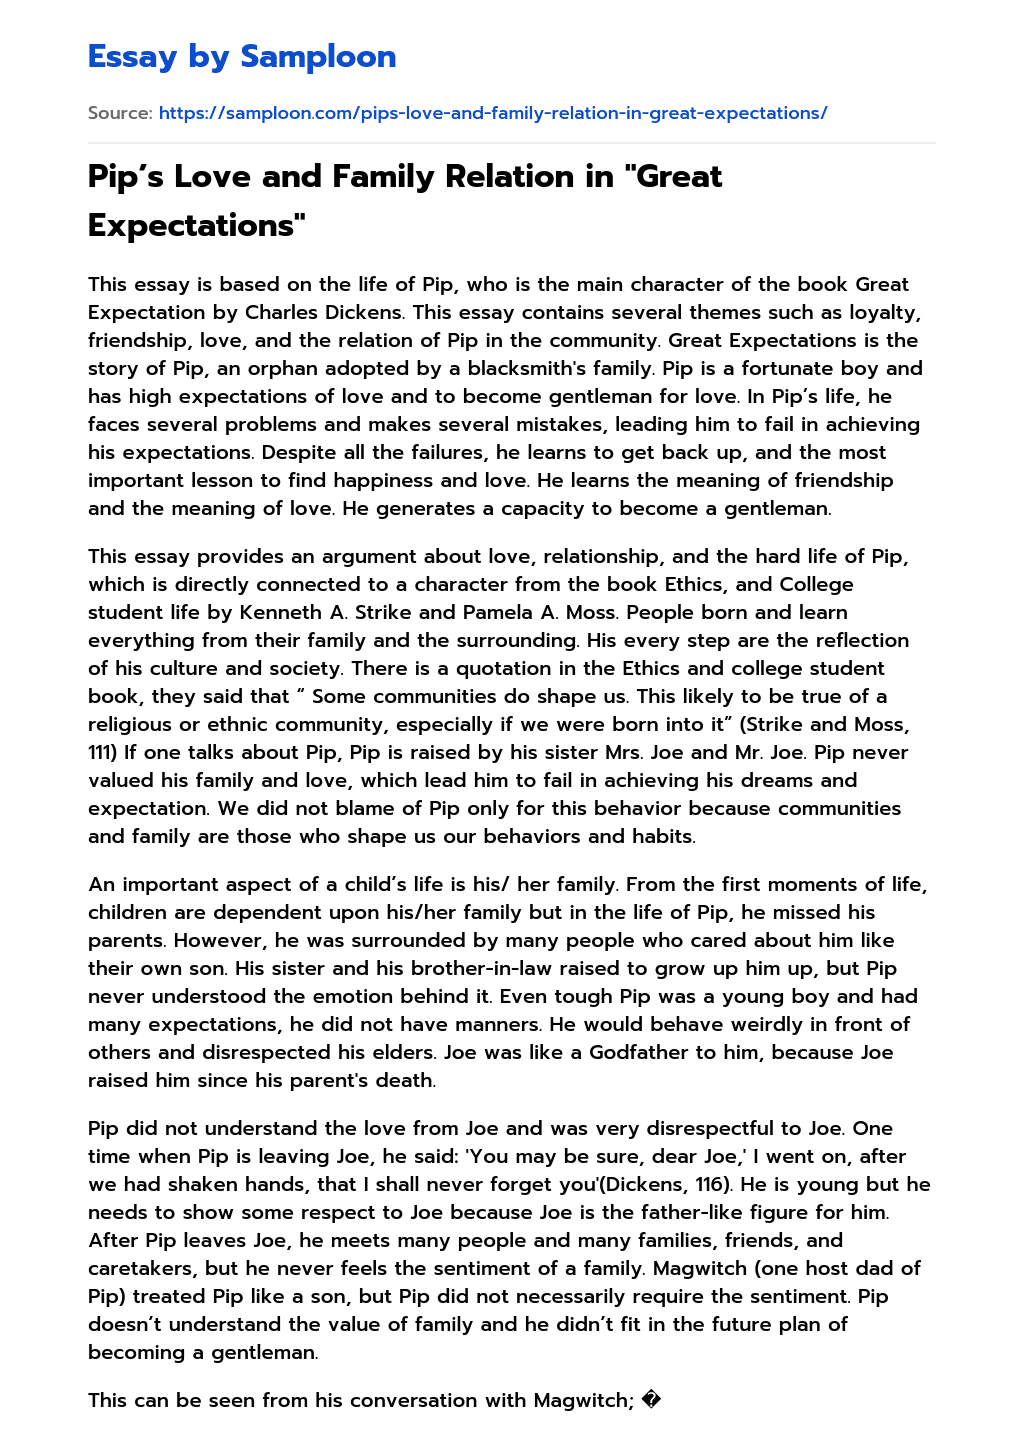 family expectations or problems essay